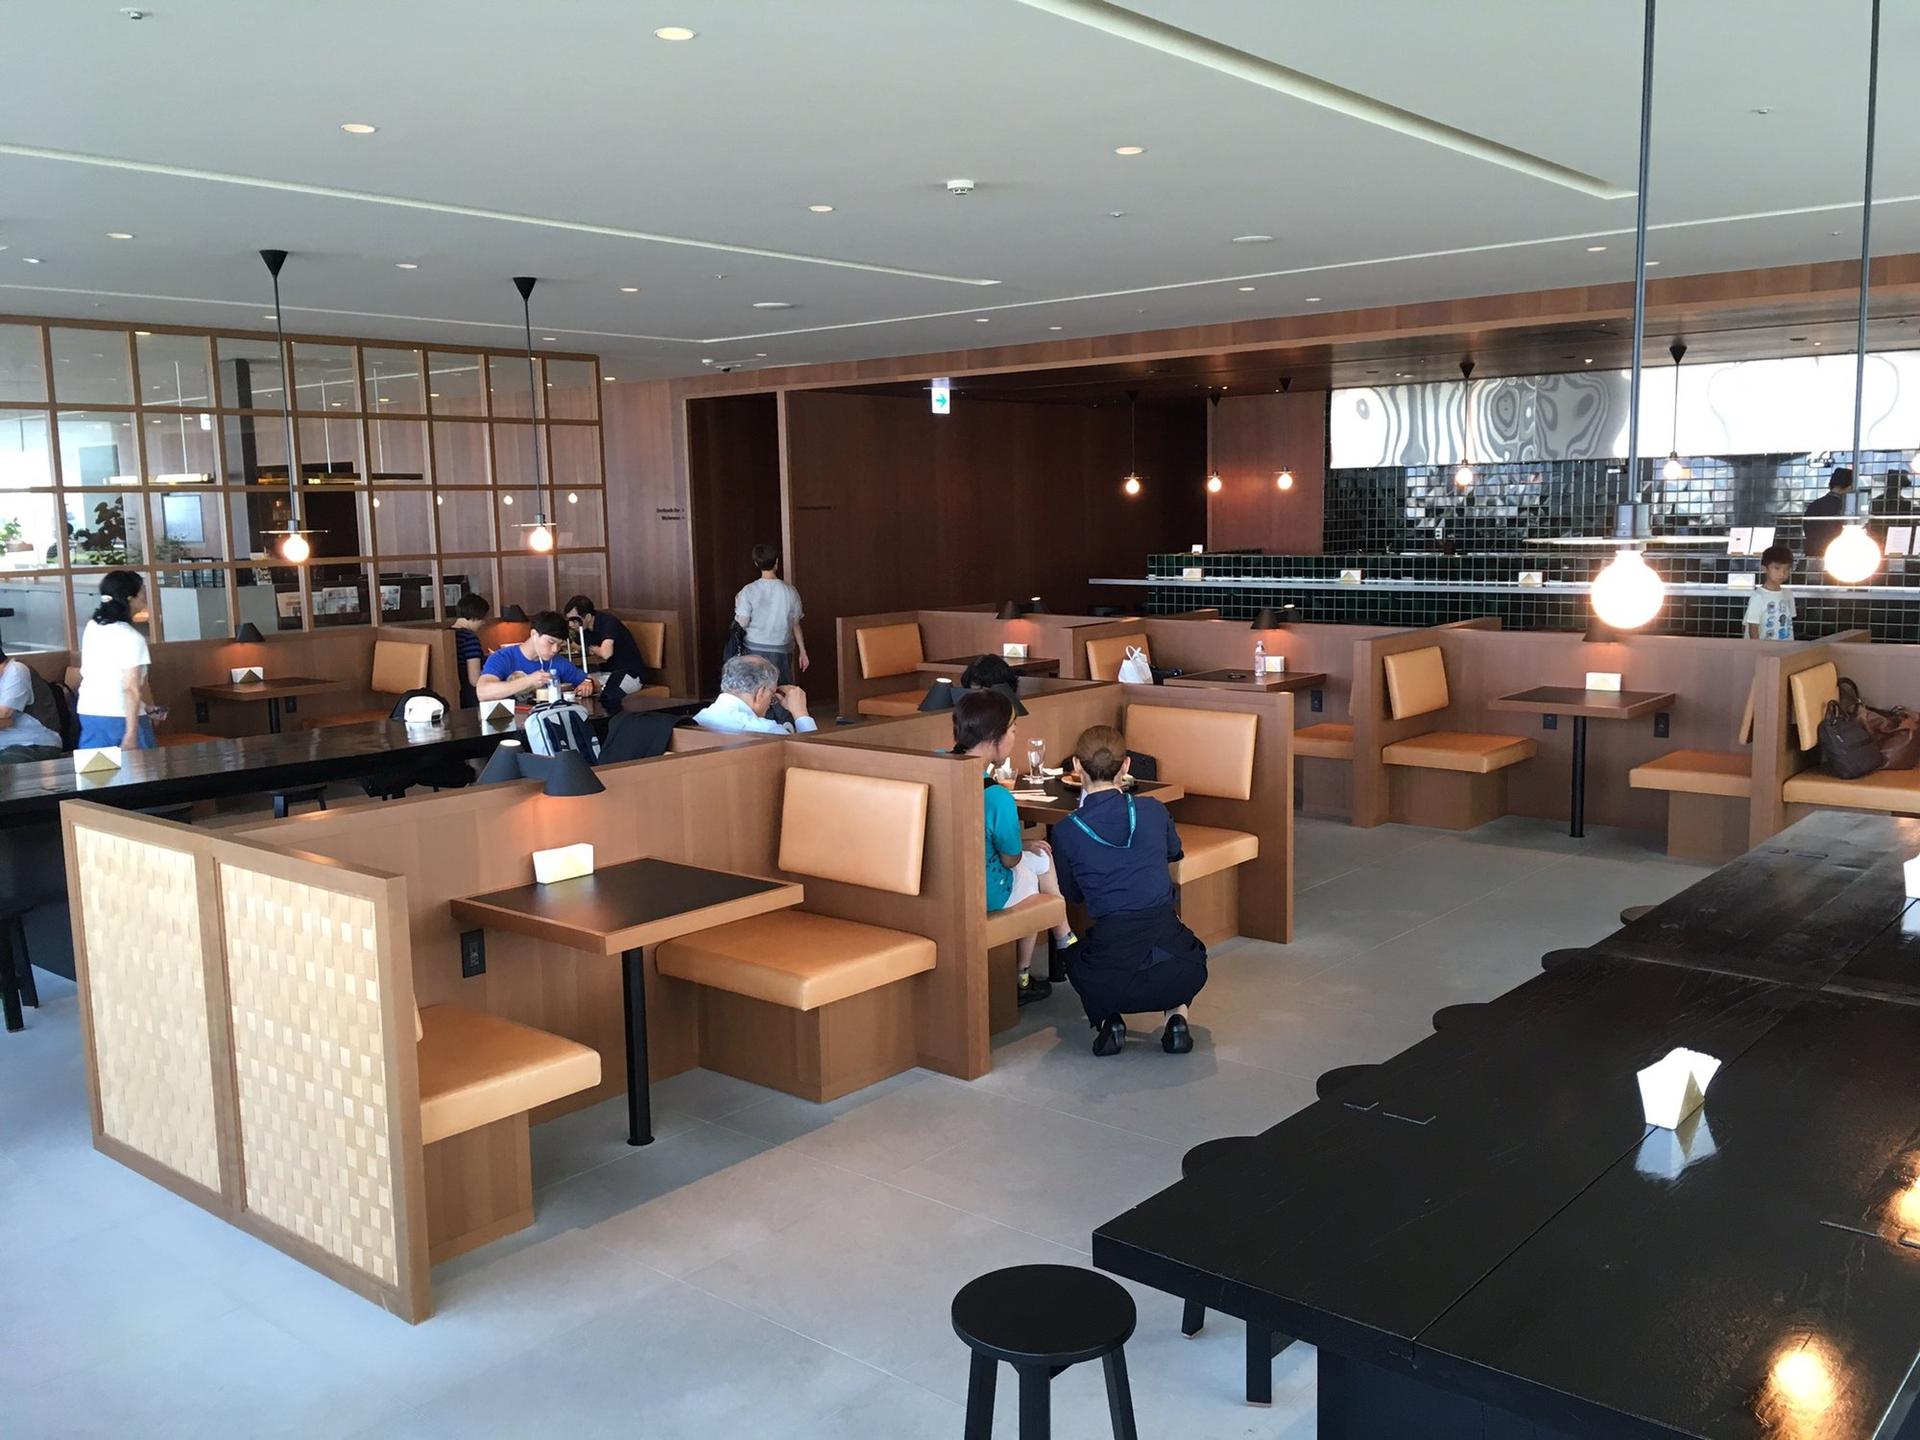 Cathay Pacific Lounge image 26 of 49